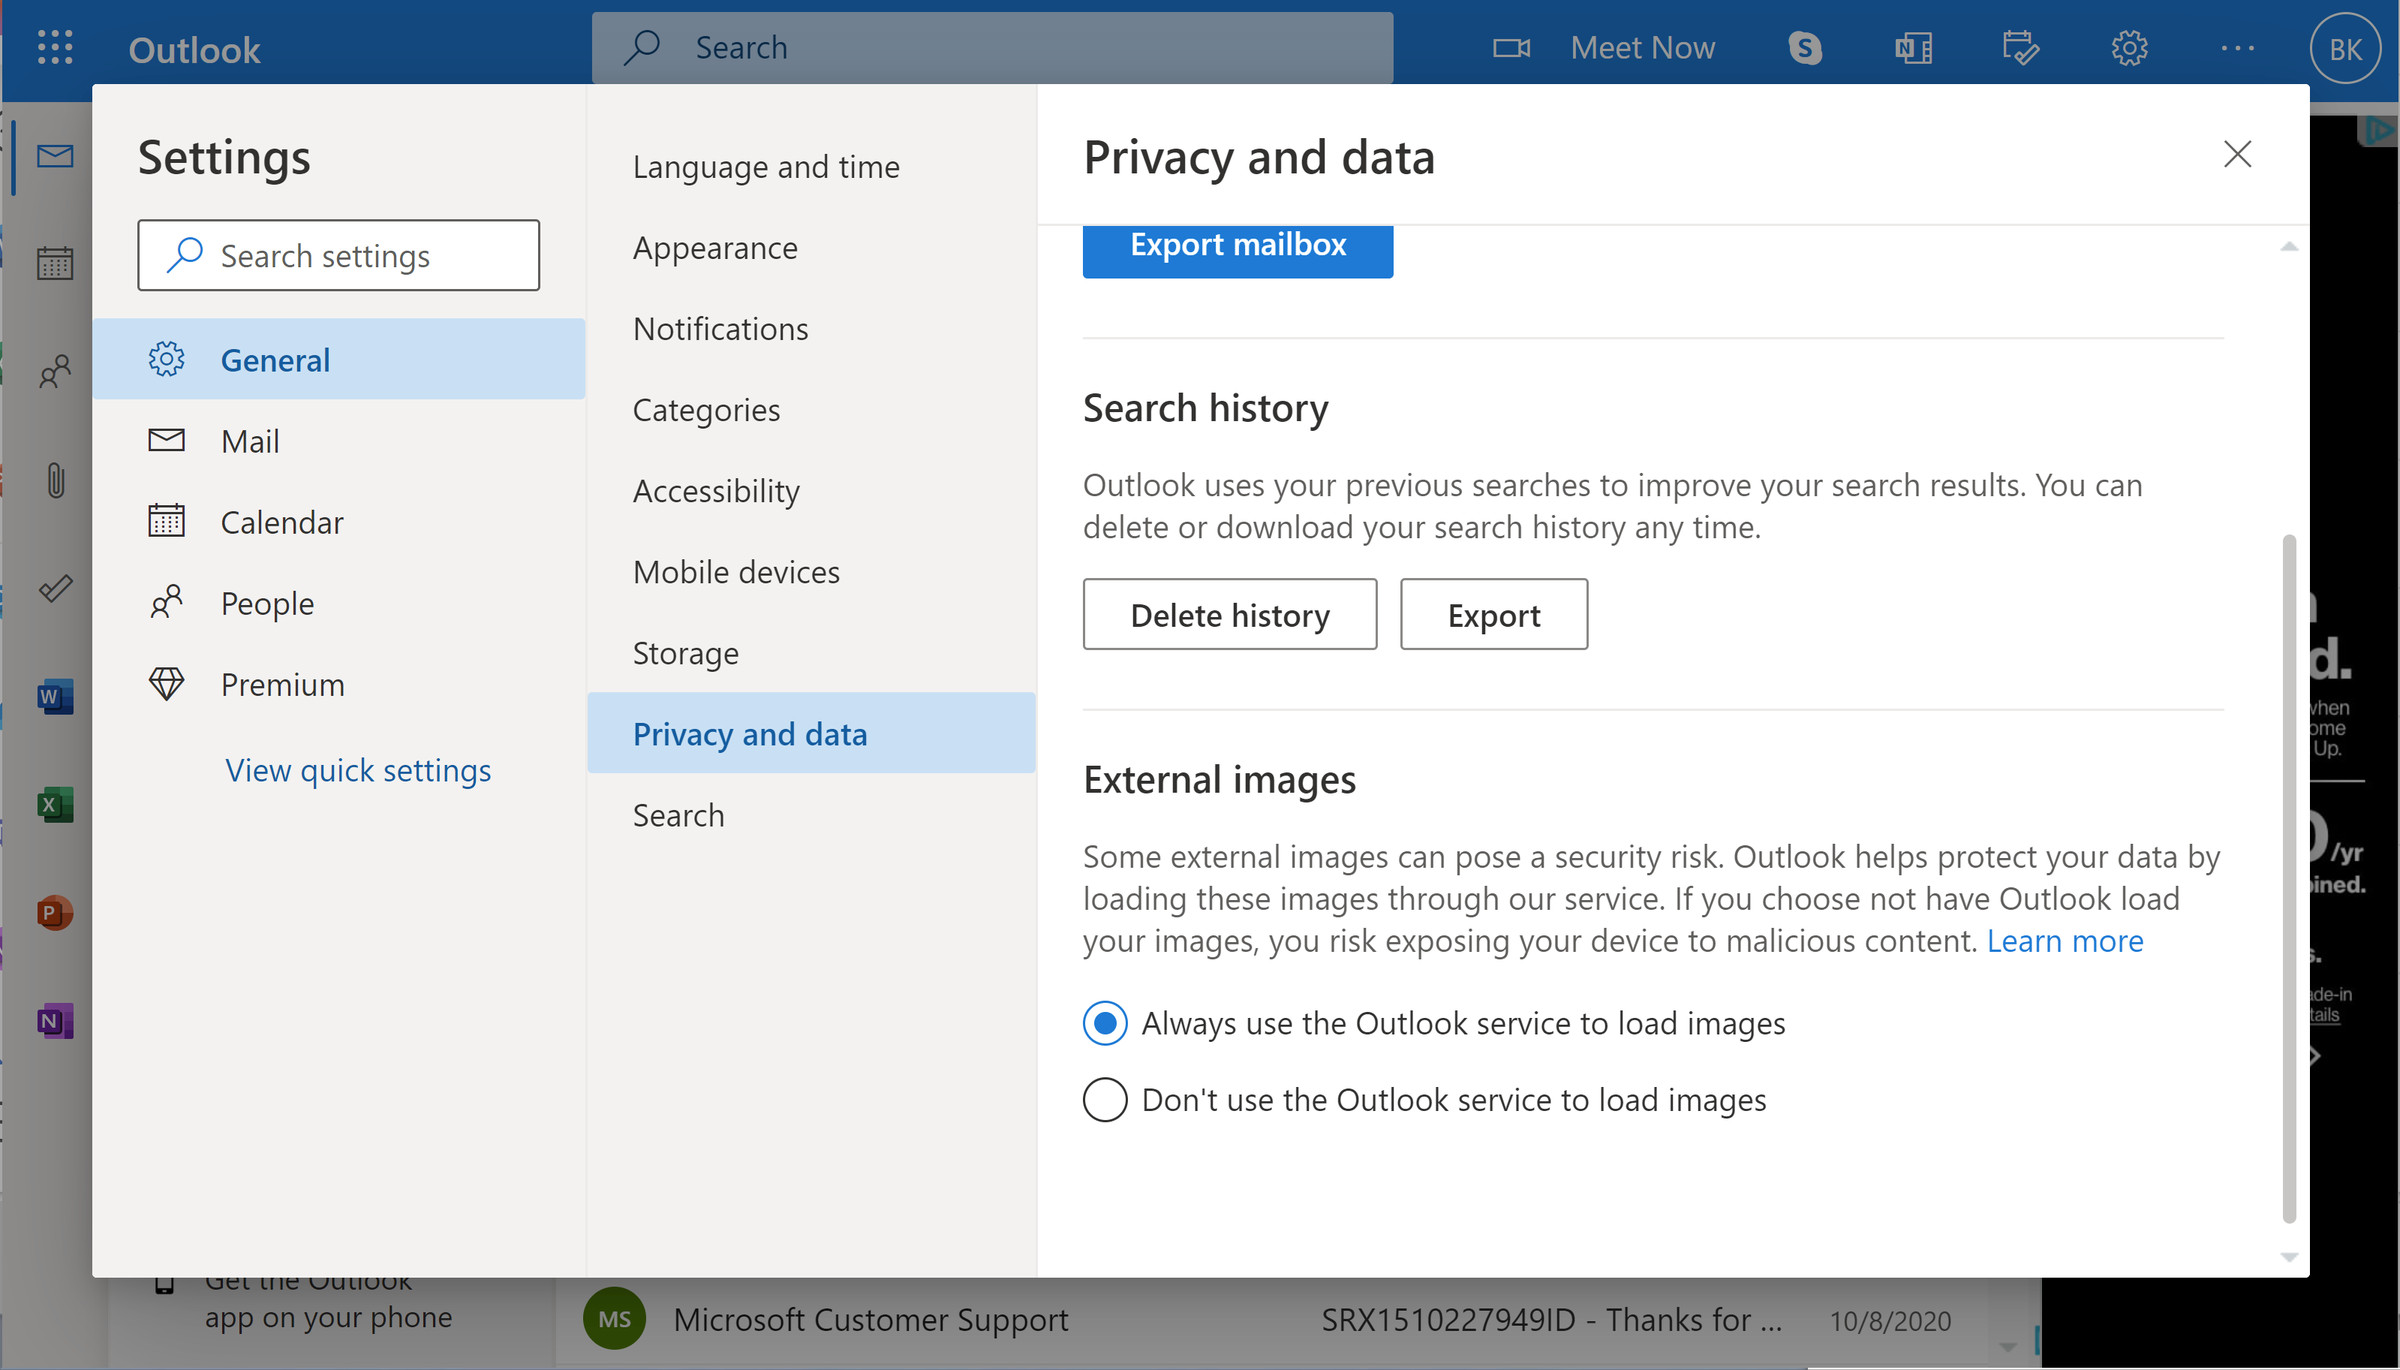 Outlook.com can route incoming images through its own service.